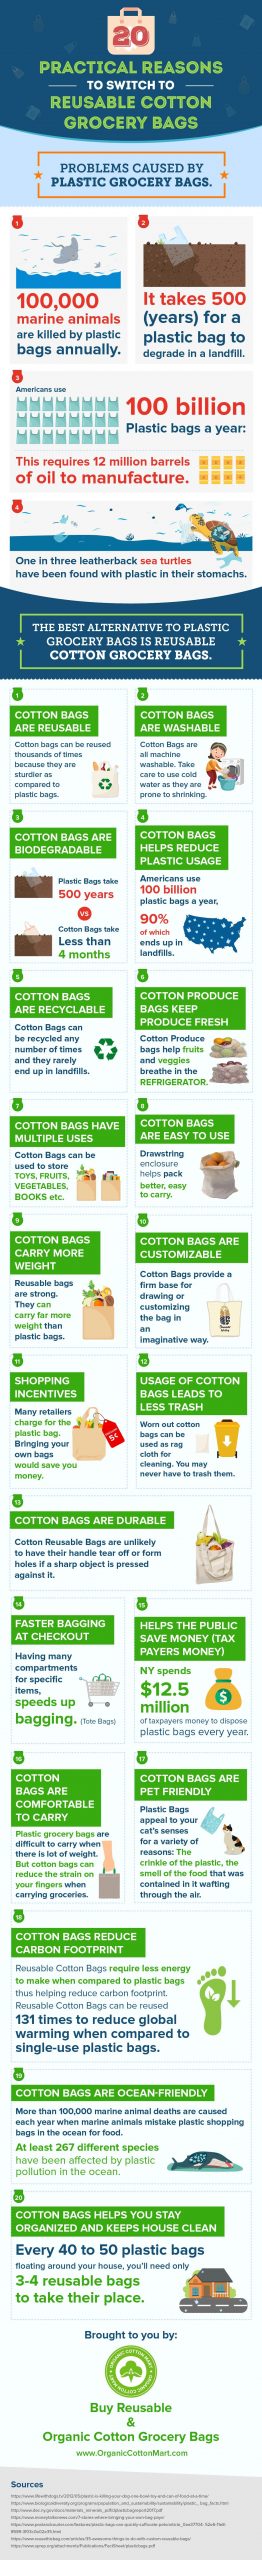 Reasons-To-Replace-Plastic-Bags-With-Cotton-Reusable-Bags